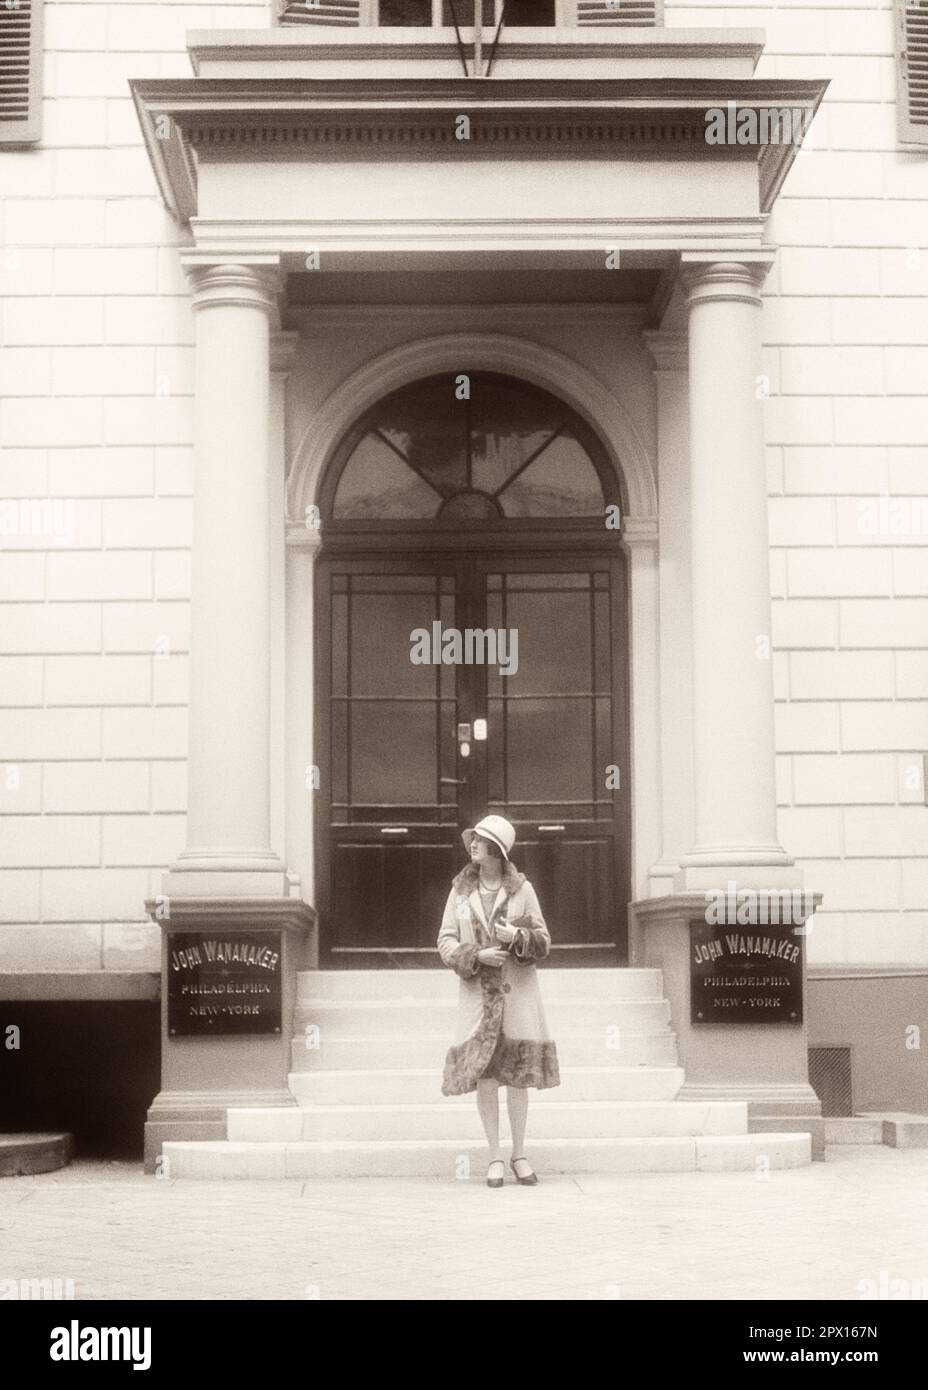 1920s FASHIONABLY DRESSED WOMAN TOURIST STANDING ON OFFICE STEPS OF JOHN WANAMAKER COMPANY DEPARTMENT STORE PARIS FRANCE - r2585 HAR001 HARS LUXURY COPY SPACE FULL-LENGTH LADIES PERSONS INSPIRATION BUILDINGS EUROPE B&W SHOPPER SHOPPERS HAPPINESS ADVENTURE DISCOVERY EUROPEAN LEISURE PROPERTY STYLES EXTERIOR LOW ANGLE TOURIST REAL ESTATE FASHIONABLY STRUCTURES COMPANY STYLISH EDIFICE FASHIONS WANAMAKER YOUNG ADULT WOMAN BLACK AND WHITE CAUCASIAN ETHNICITY HAR001 OLD FASHIONED Stock Photo